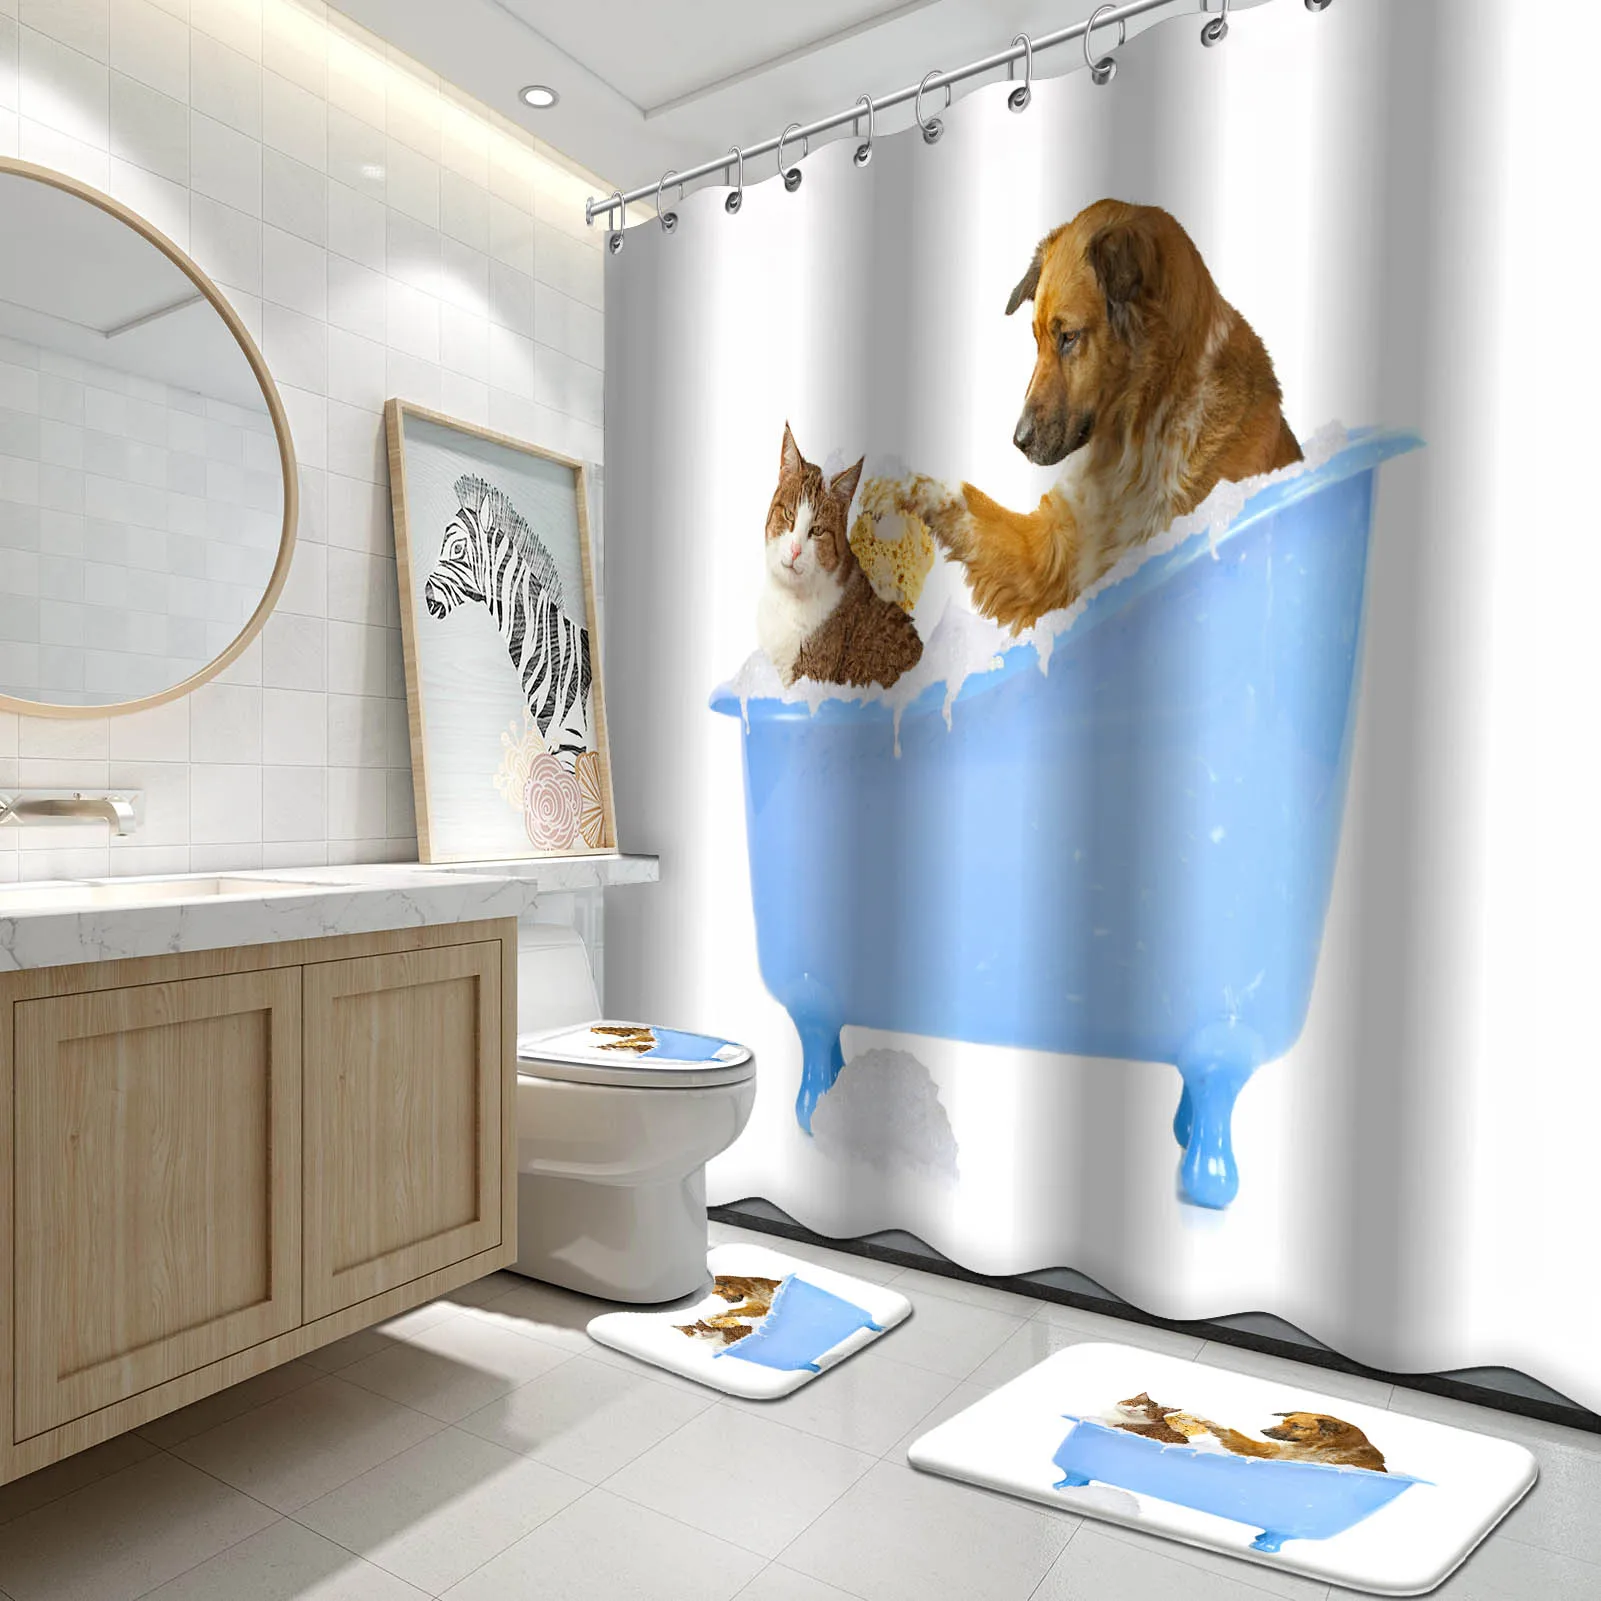 

Creative Dog and Cat Shower Curtain Cute Pet Animal Bathroom Curtains Polyester Fabric Waterproof 72 X 72 Inches Include Hooks